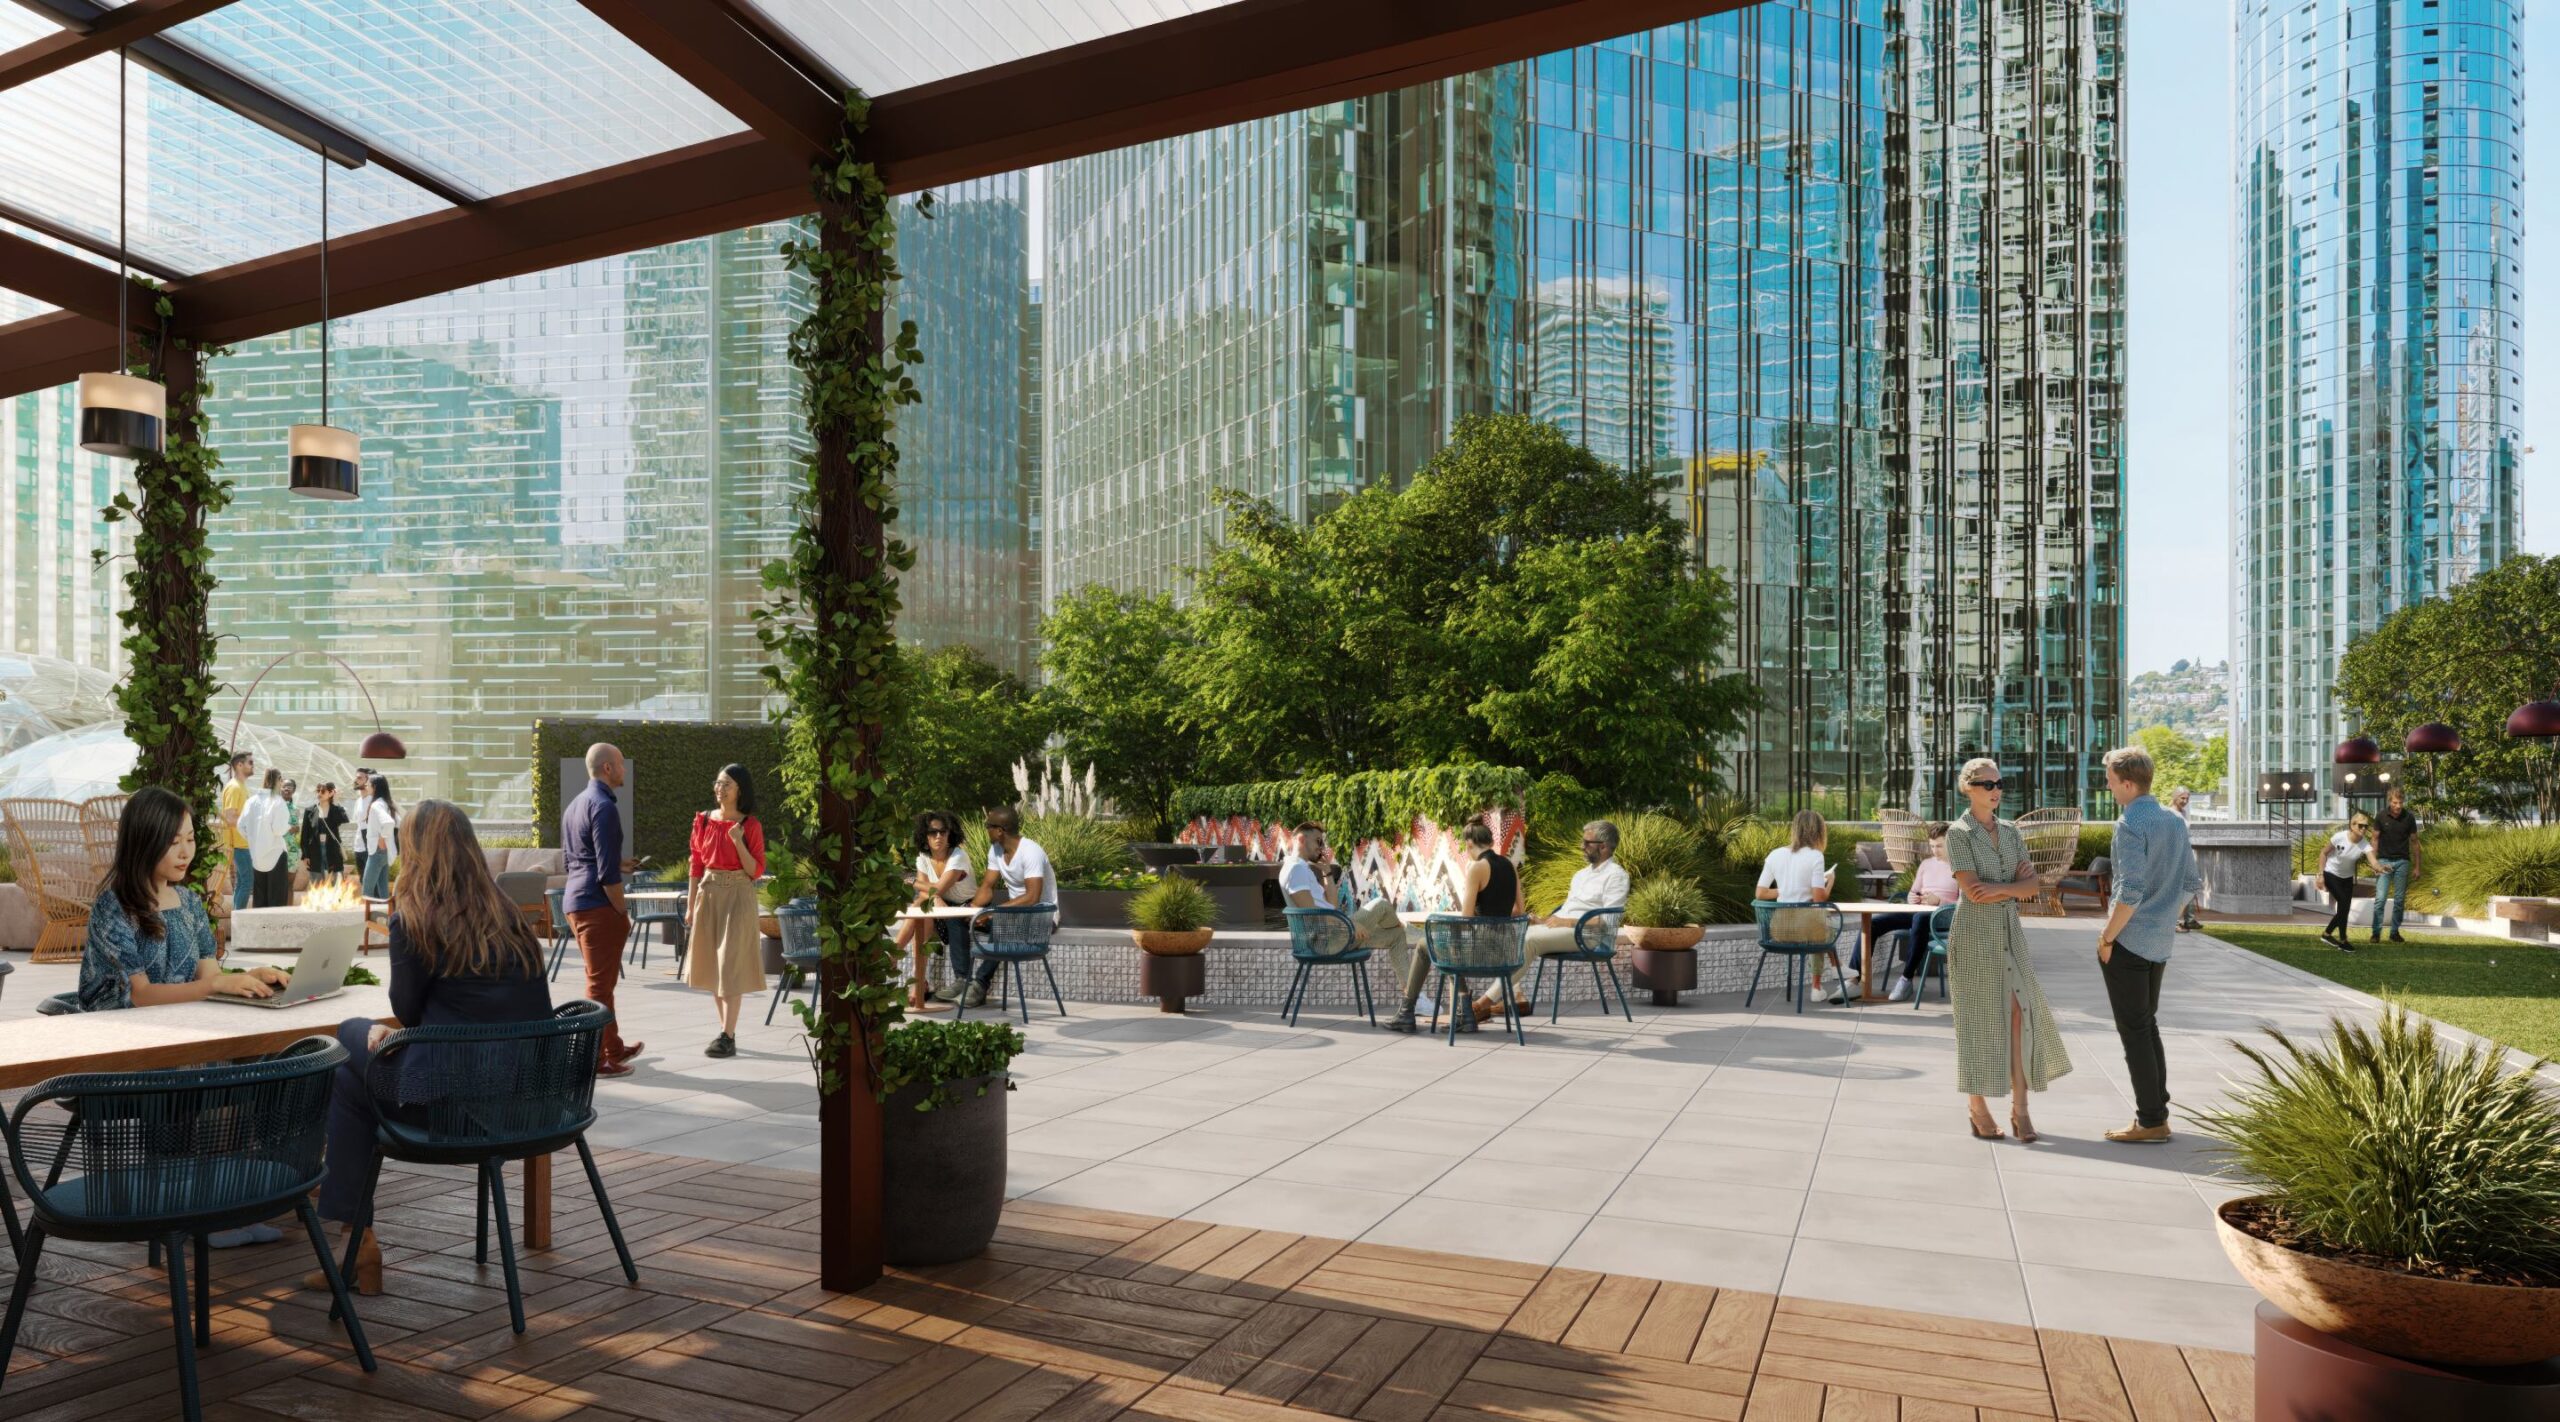 Render of people enjoying an outdoor patio space at The Terrace at West8 in Seattle, WA